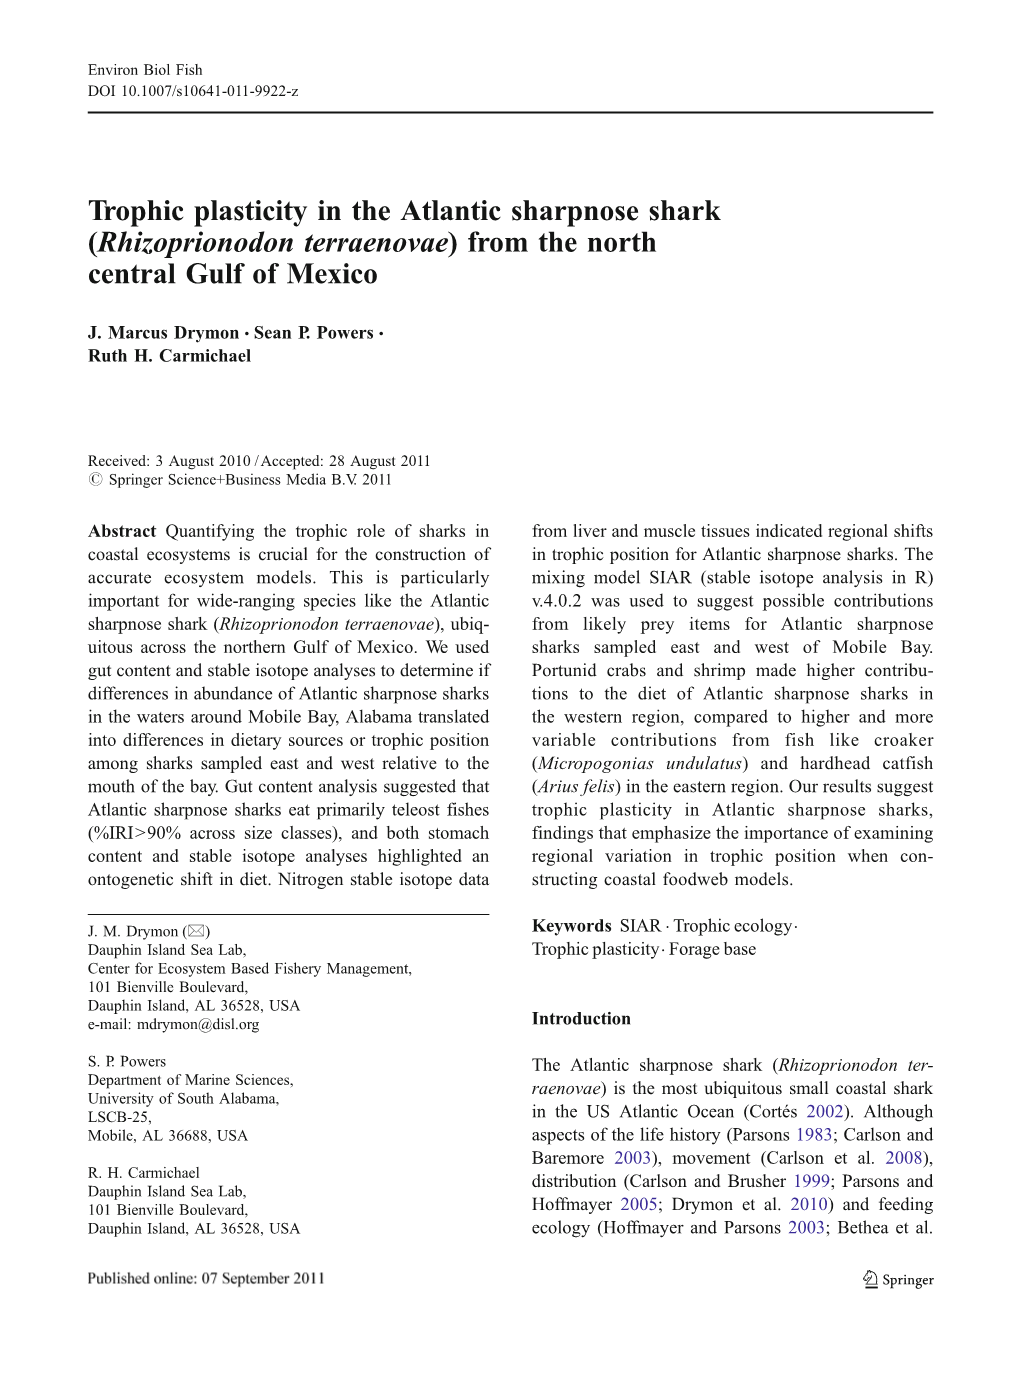 Trophic Plasticity in the Atlantic Sharpnose Shark (Rhizoprionodon Terraenovae) from the North Central Gulf of Mexico